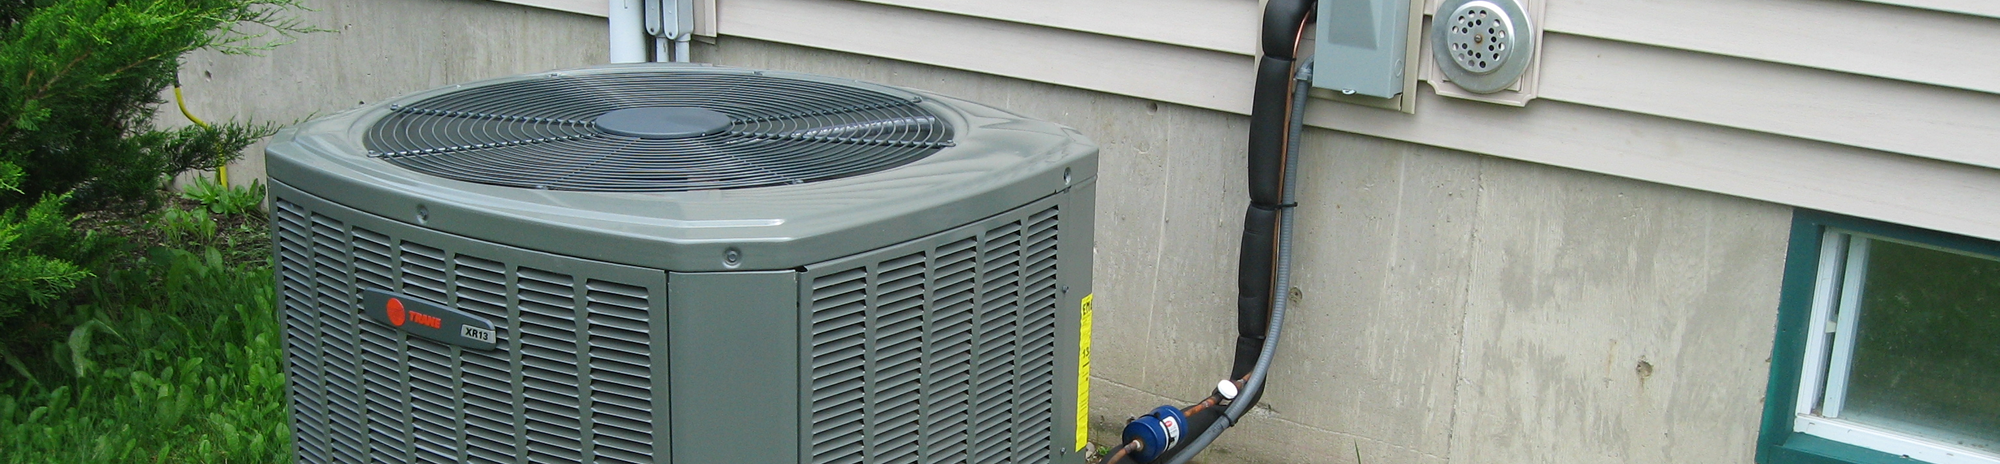 AC Repair in Mesa, Gilbert, and Gold Canyon, AZ and Valley Wide - A & A Cooling & Heating